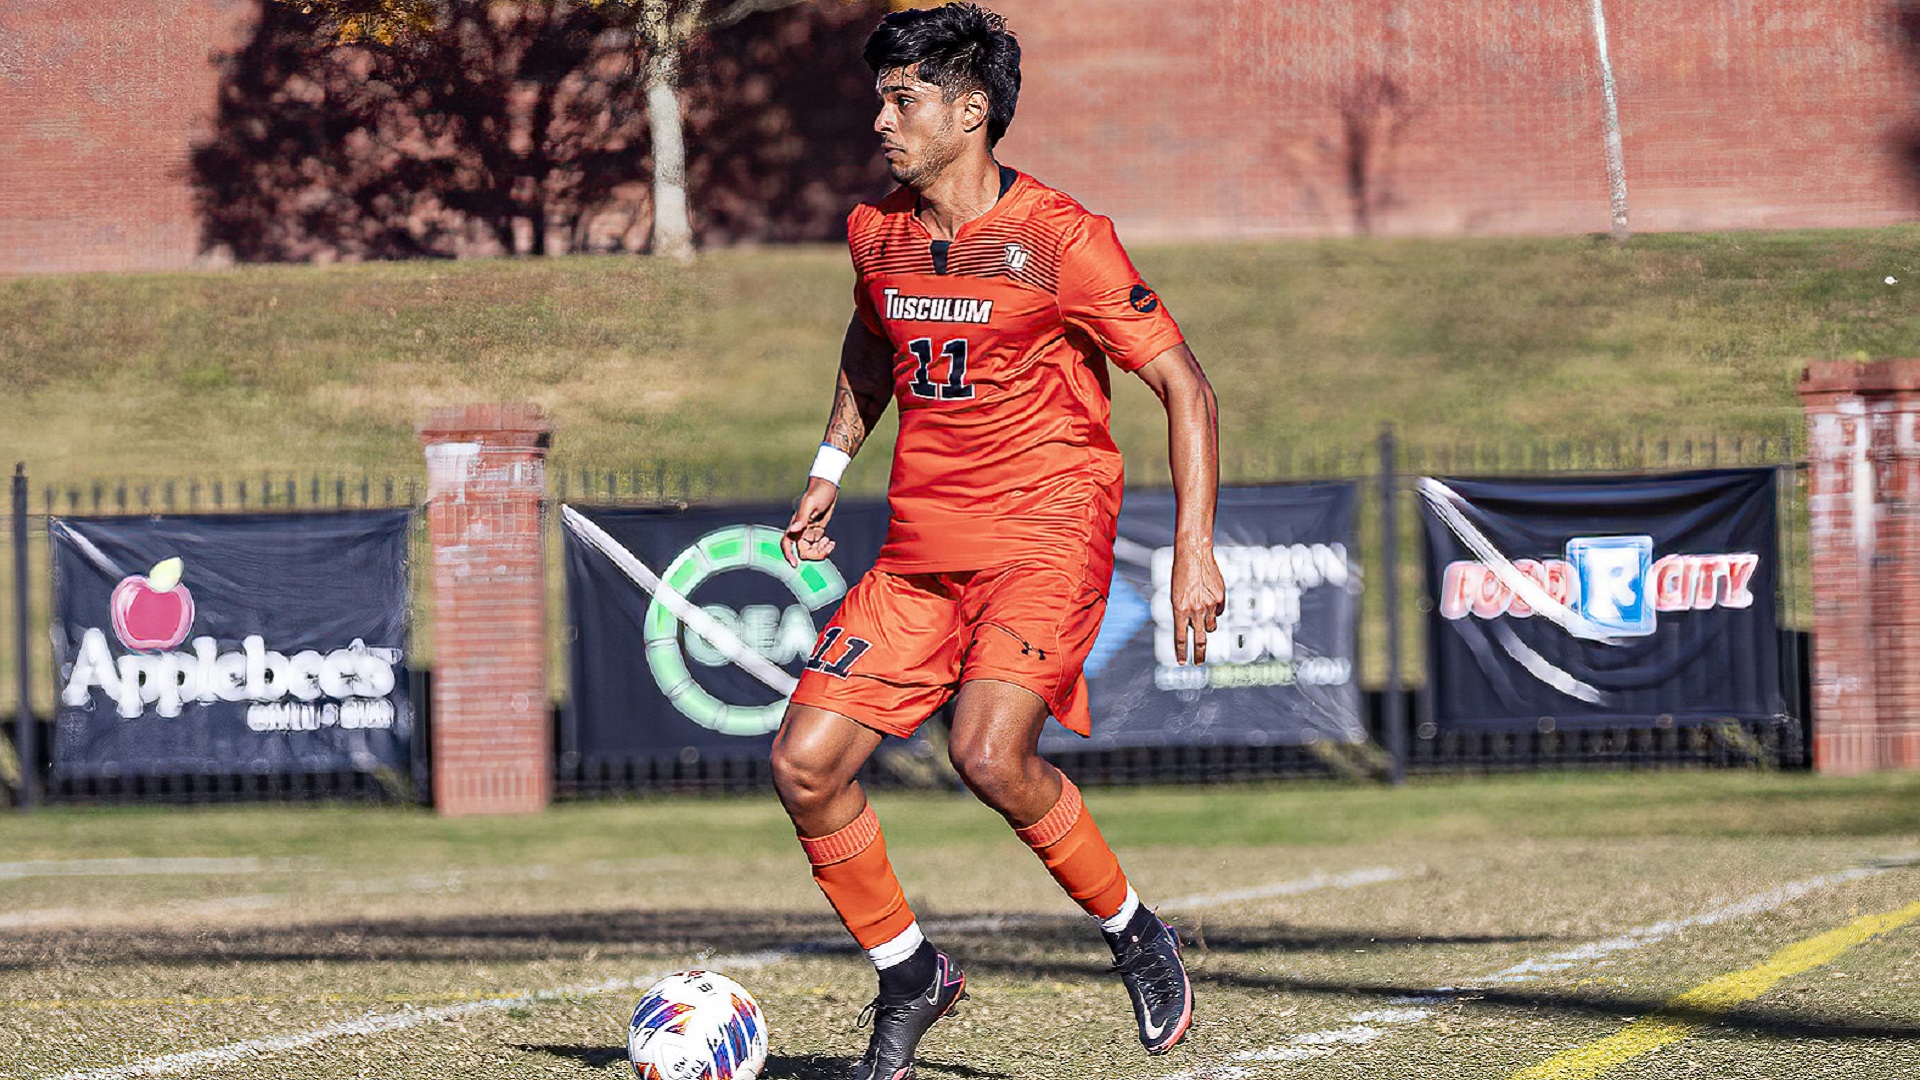 Carson-Newman comes back to take 3-1 win from Pioneers